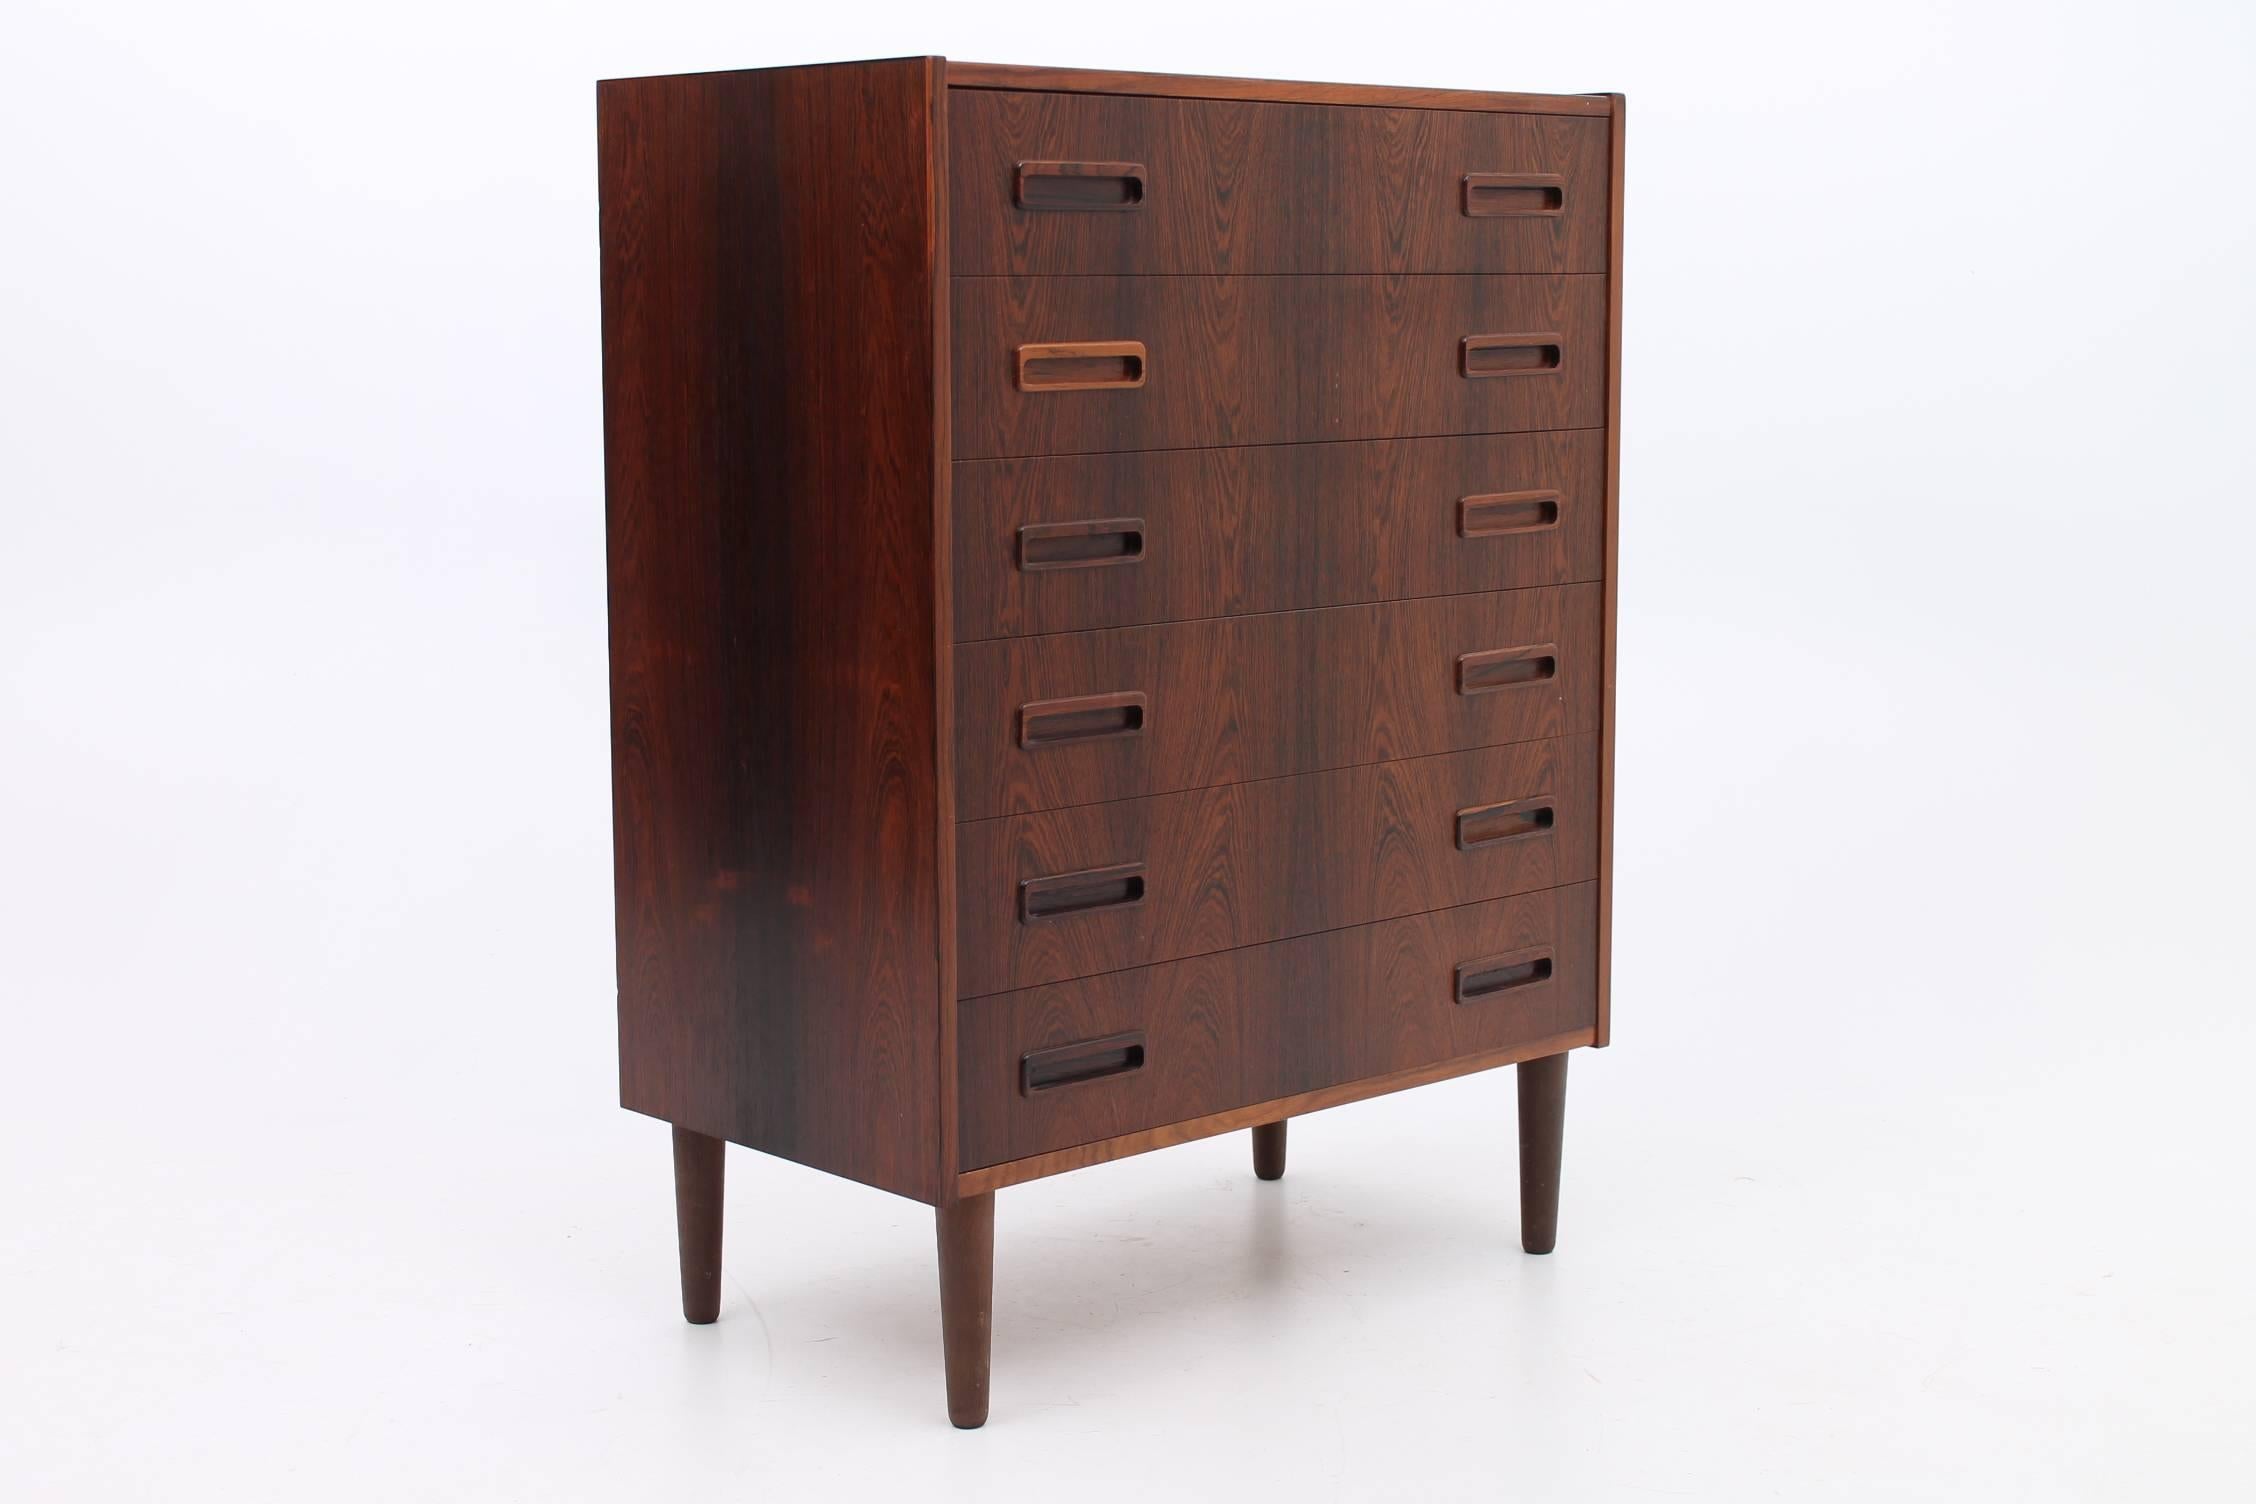 Beautiful, tall chest of drawers designed by Borge Seindal for Westergaards Møbelfabrik. This gorgeous espresso colored rosewood chest of drawers features six roomy drawers and handmade wooden handles. The wood on the chest is in exceptional